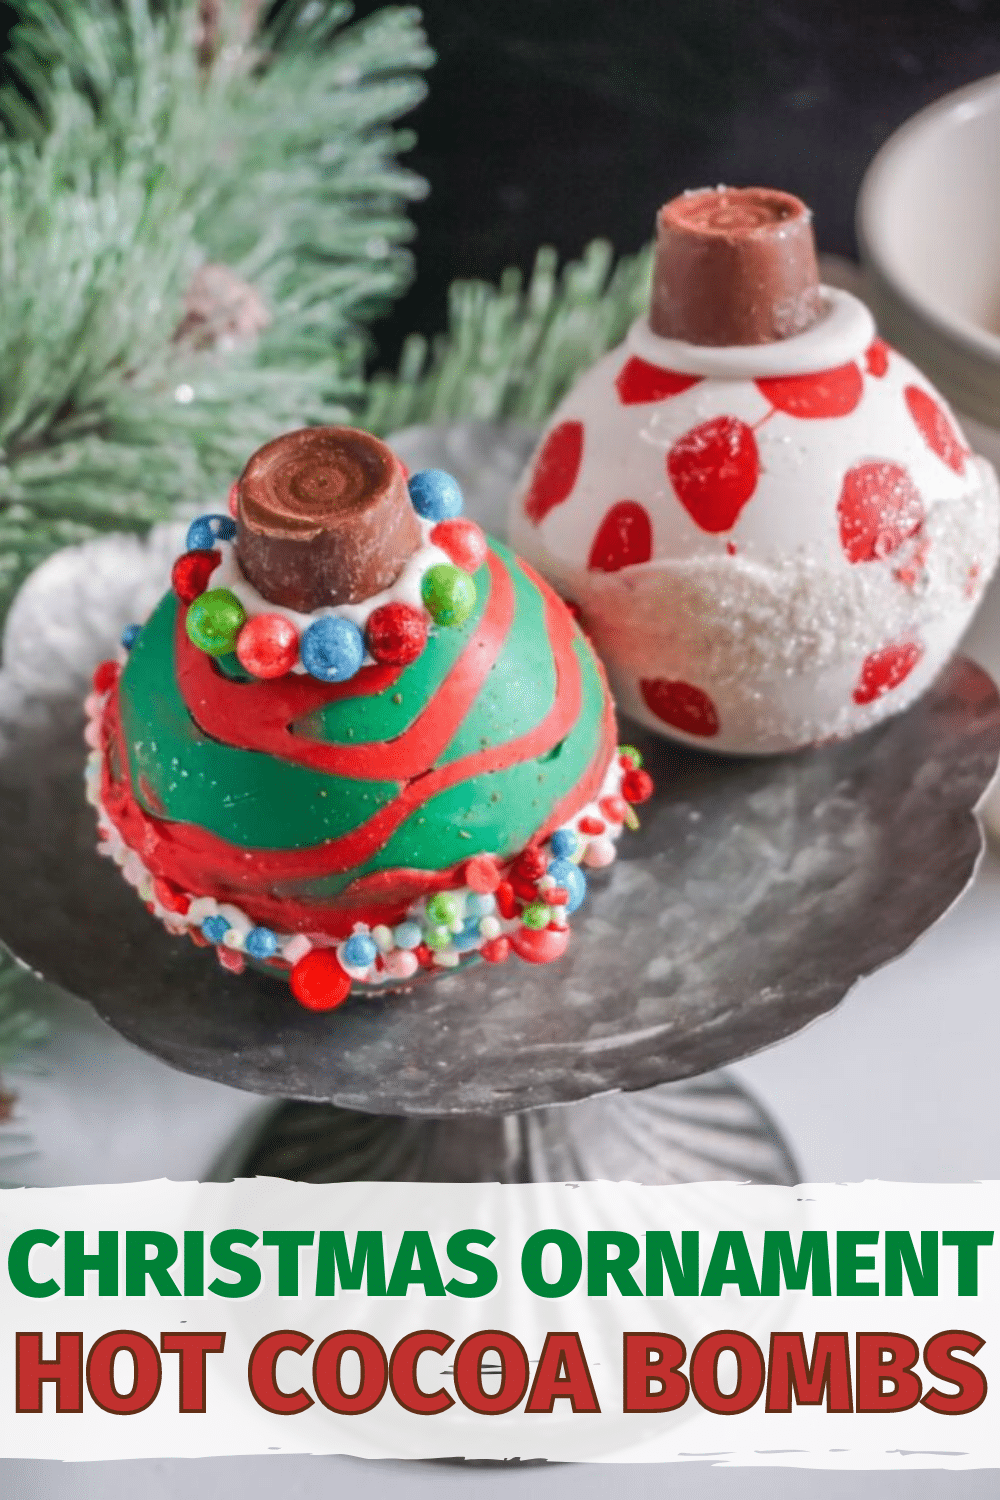 Just when you thought that the holiday season couldn't get any better, along comes these Christmas Ornament Hot Cocoa Bombs! #hotcocoabombs #hotcocoa #christmasornament #holidaytreats via @wondermomwannab